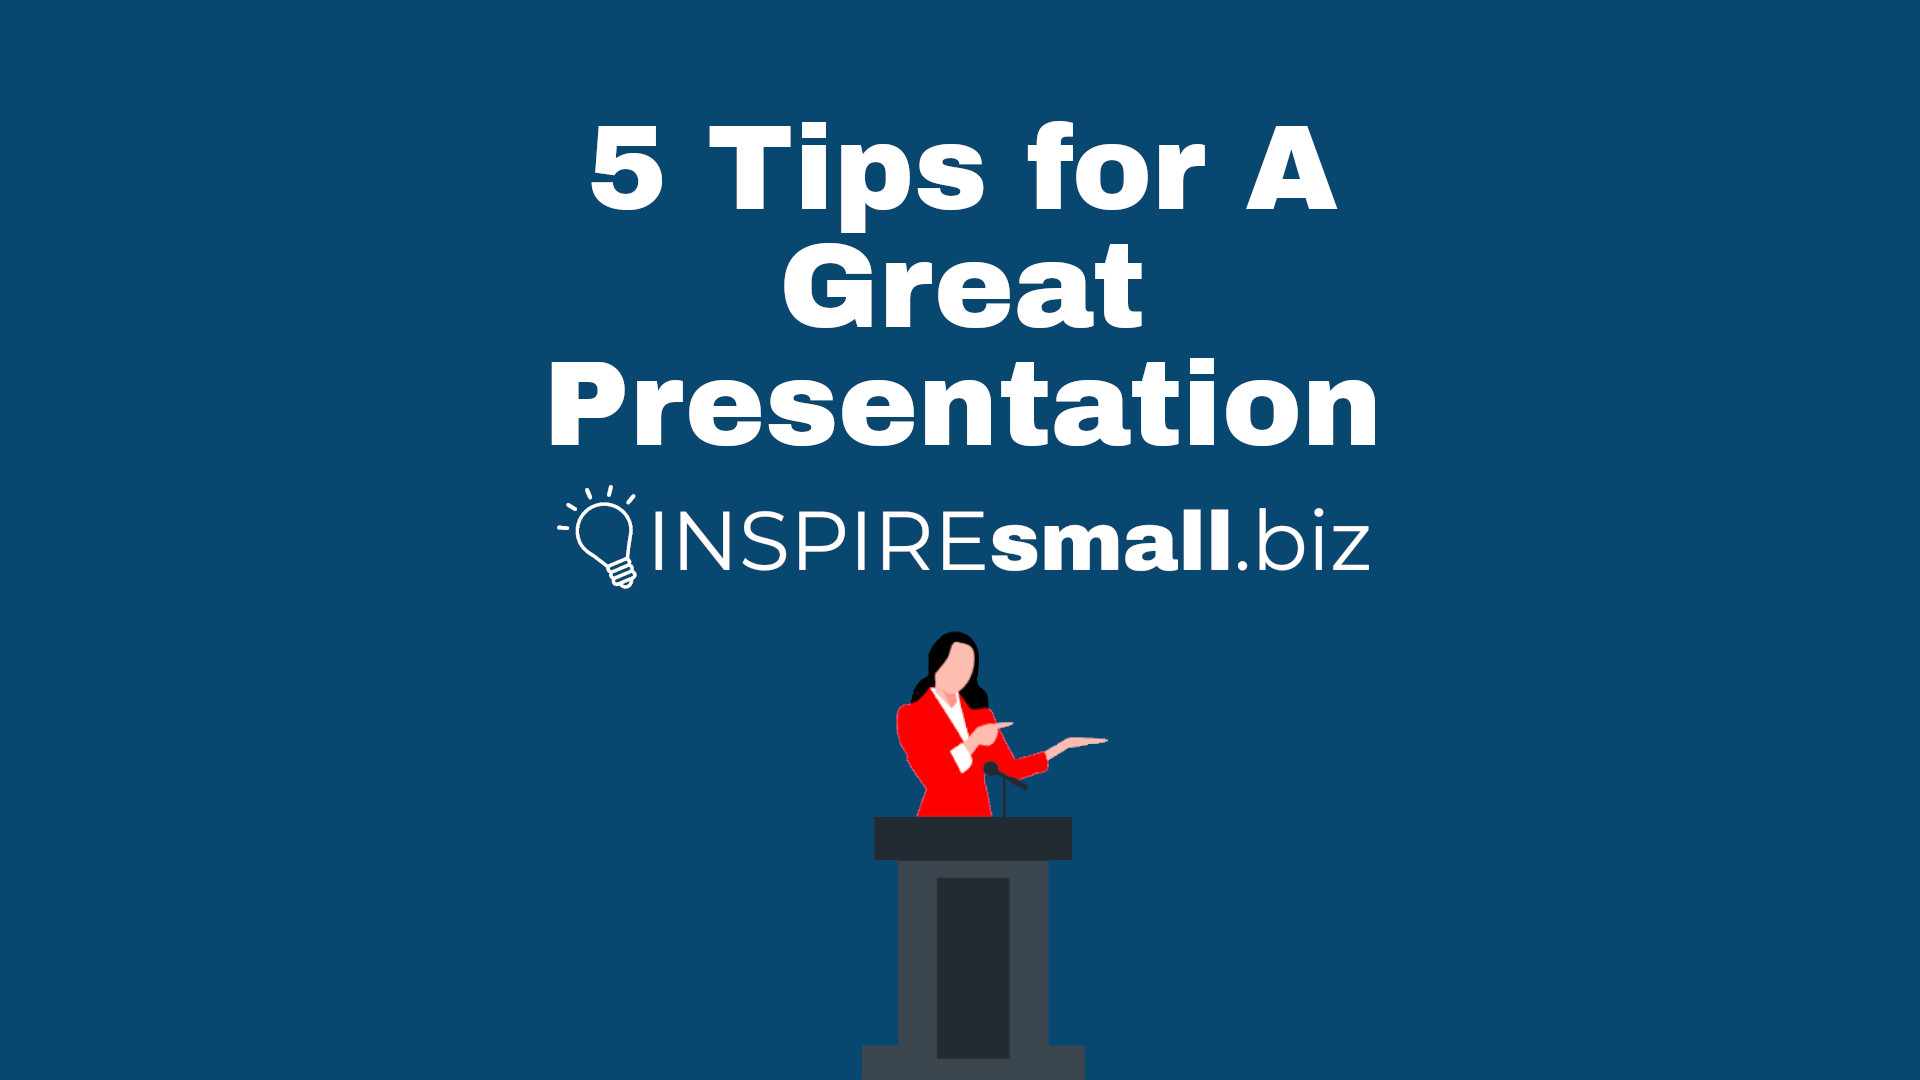 5 Tips for A Great Presentation